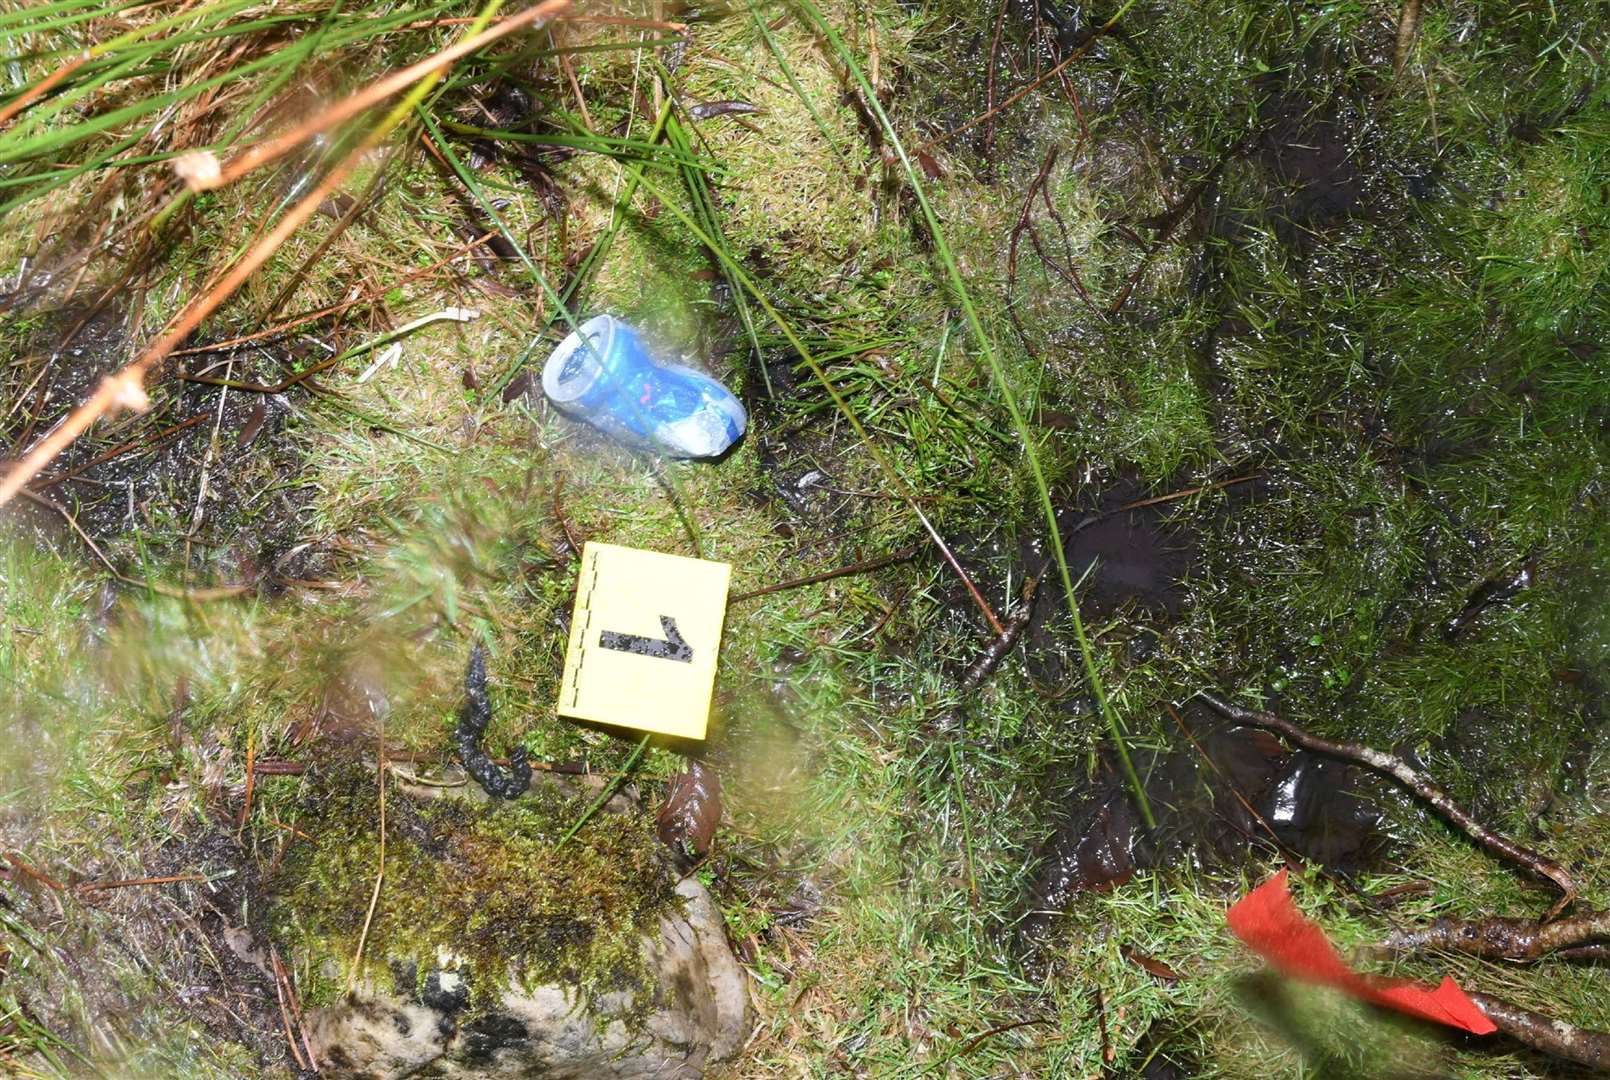 A can of Red Bull was left to mark the scene where the body was buried (Crown Office/PA)